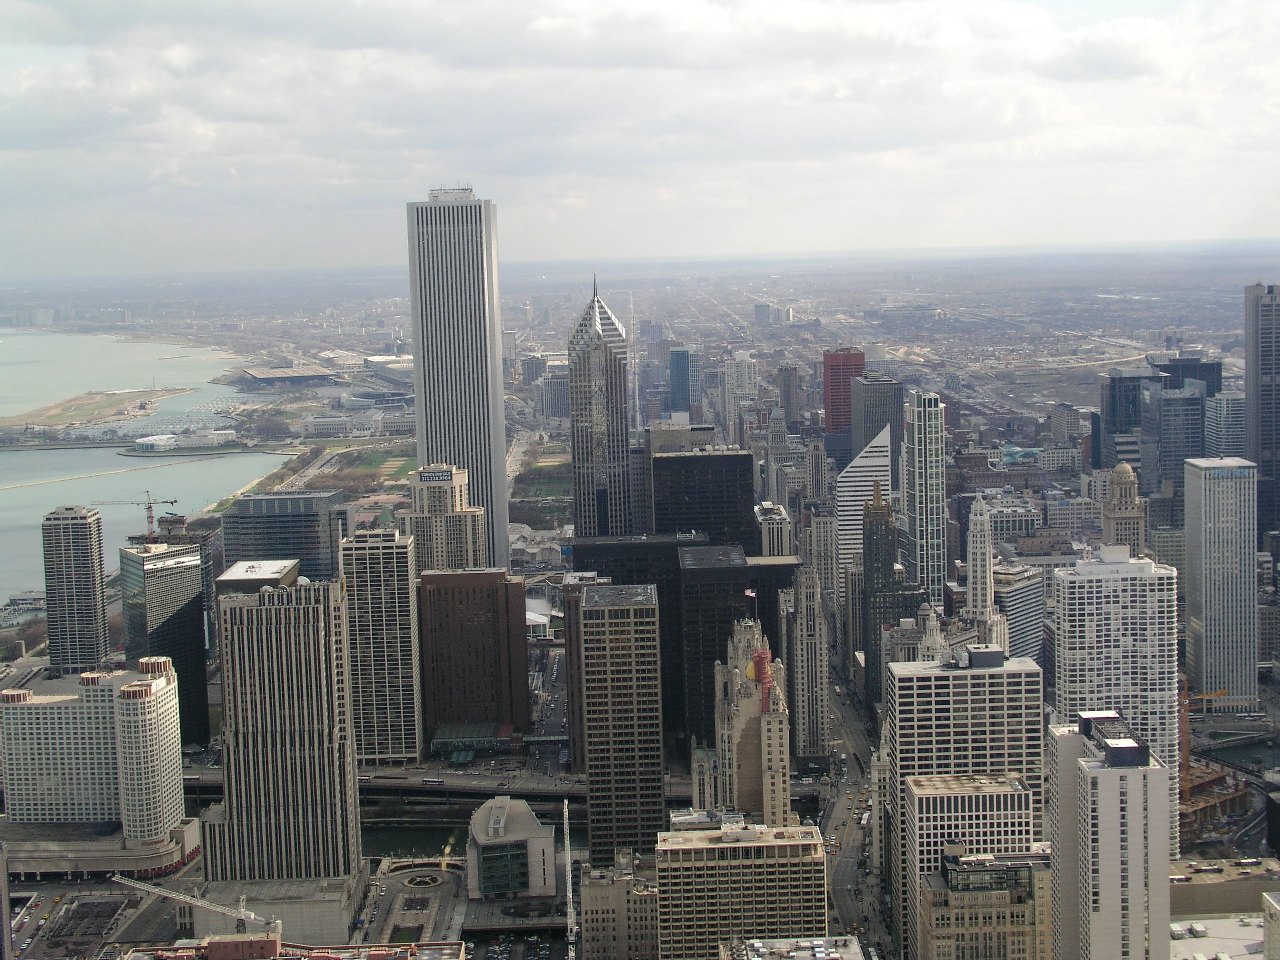 From the top of the Sears Tower